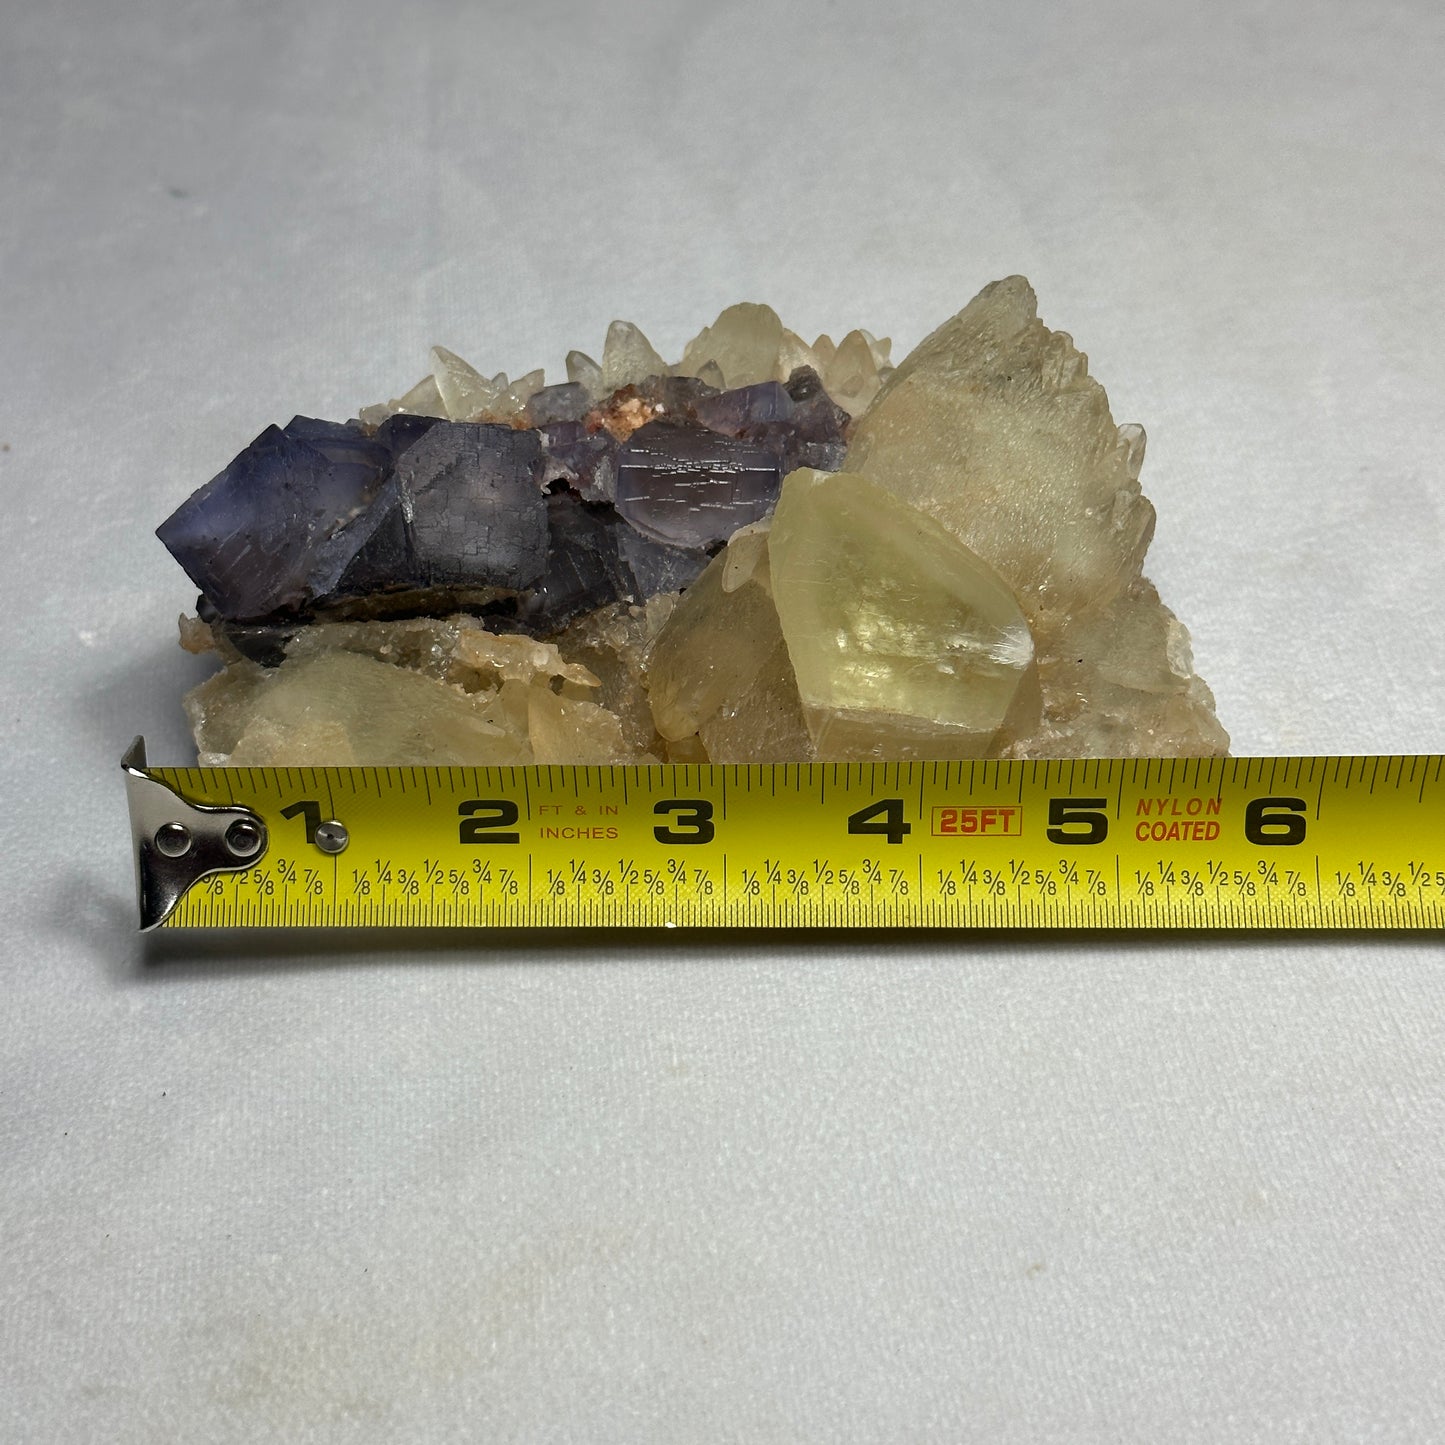 Stunning Dogtooth Calcite and Fluorite